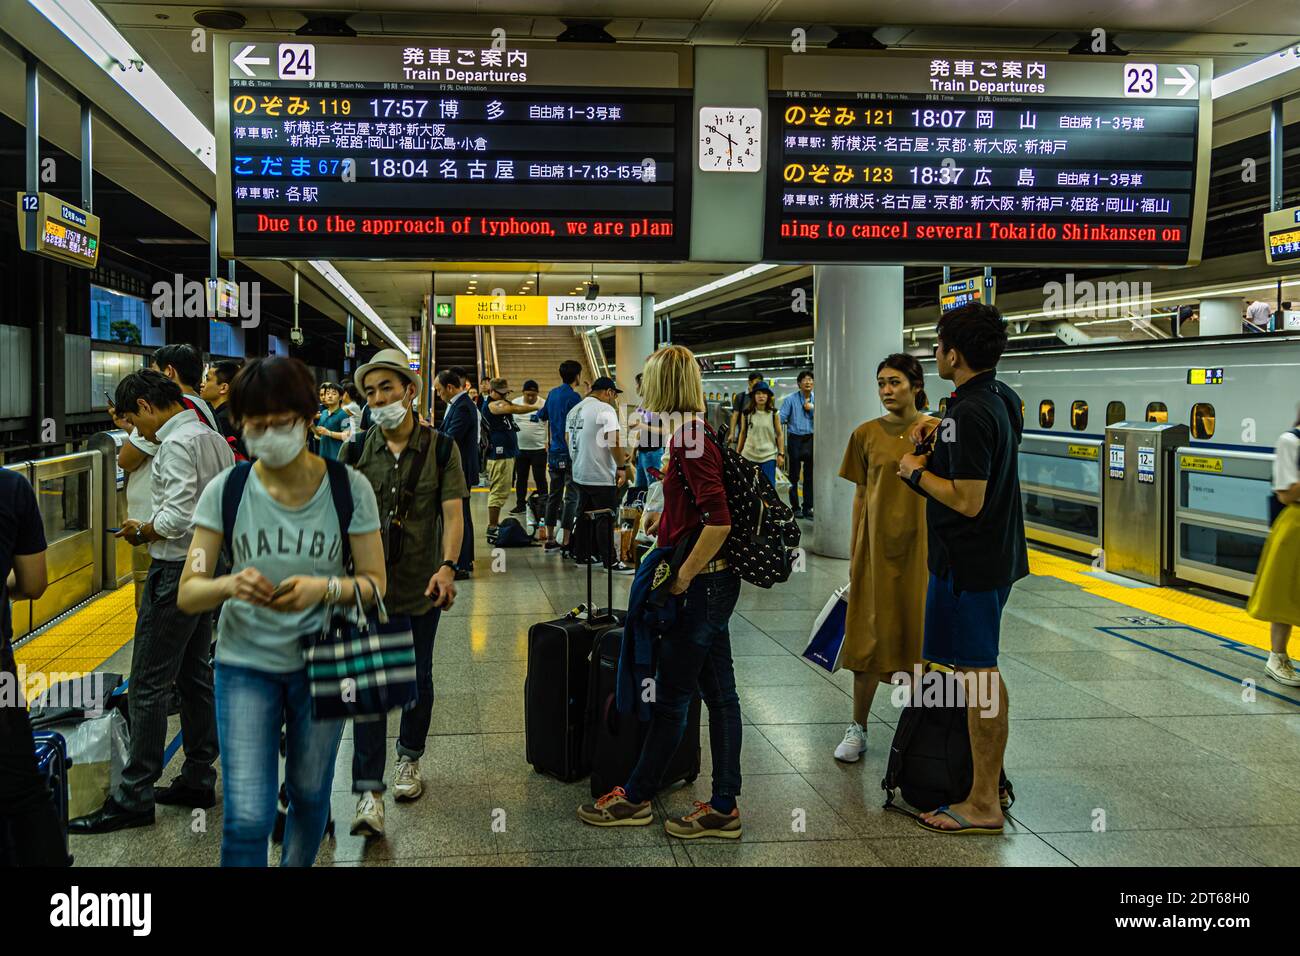 On time until the last departure of the Shinkansen. Travelers have been preparing for the arrival of a strong typhoon for days. Typhoon Warning on Plattform of Shinagawa Shinkansen Station, Japan Stock Photo